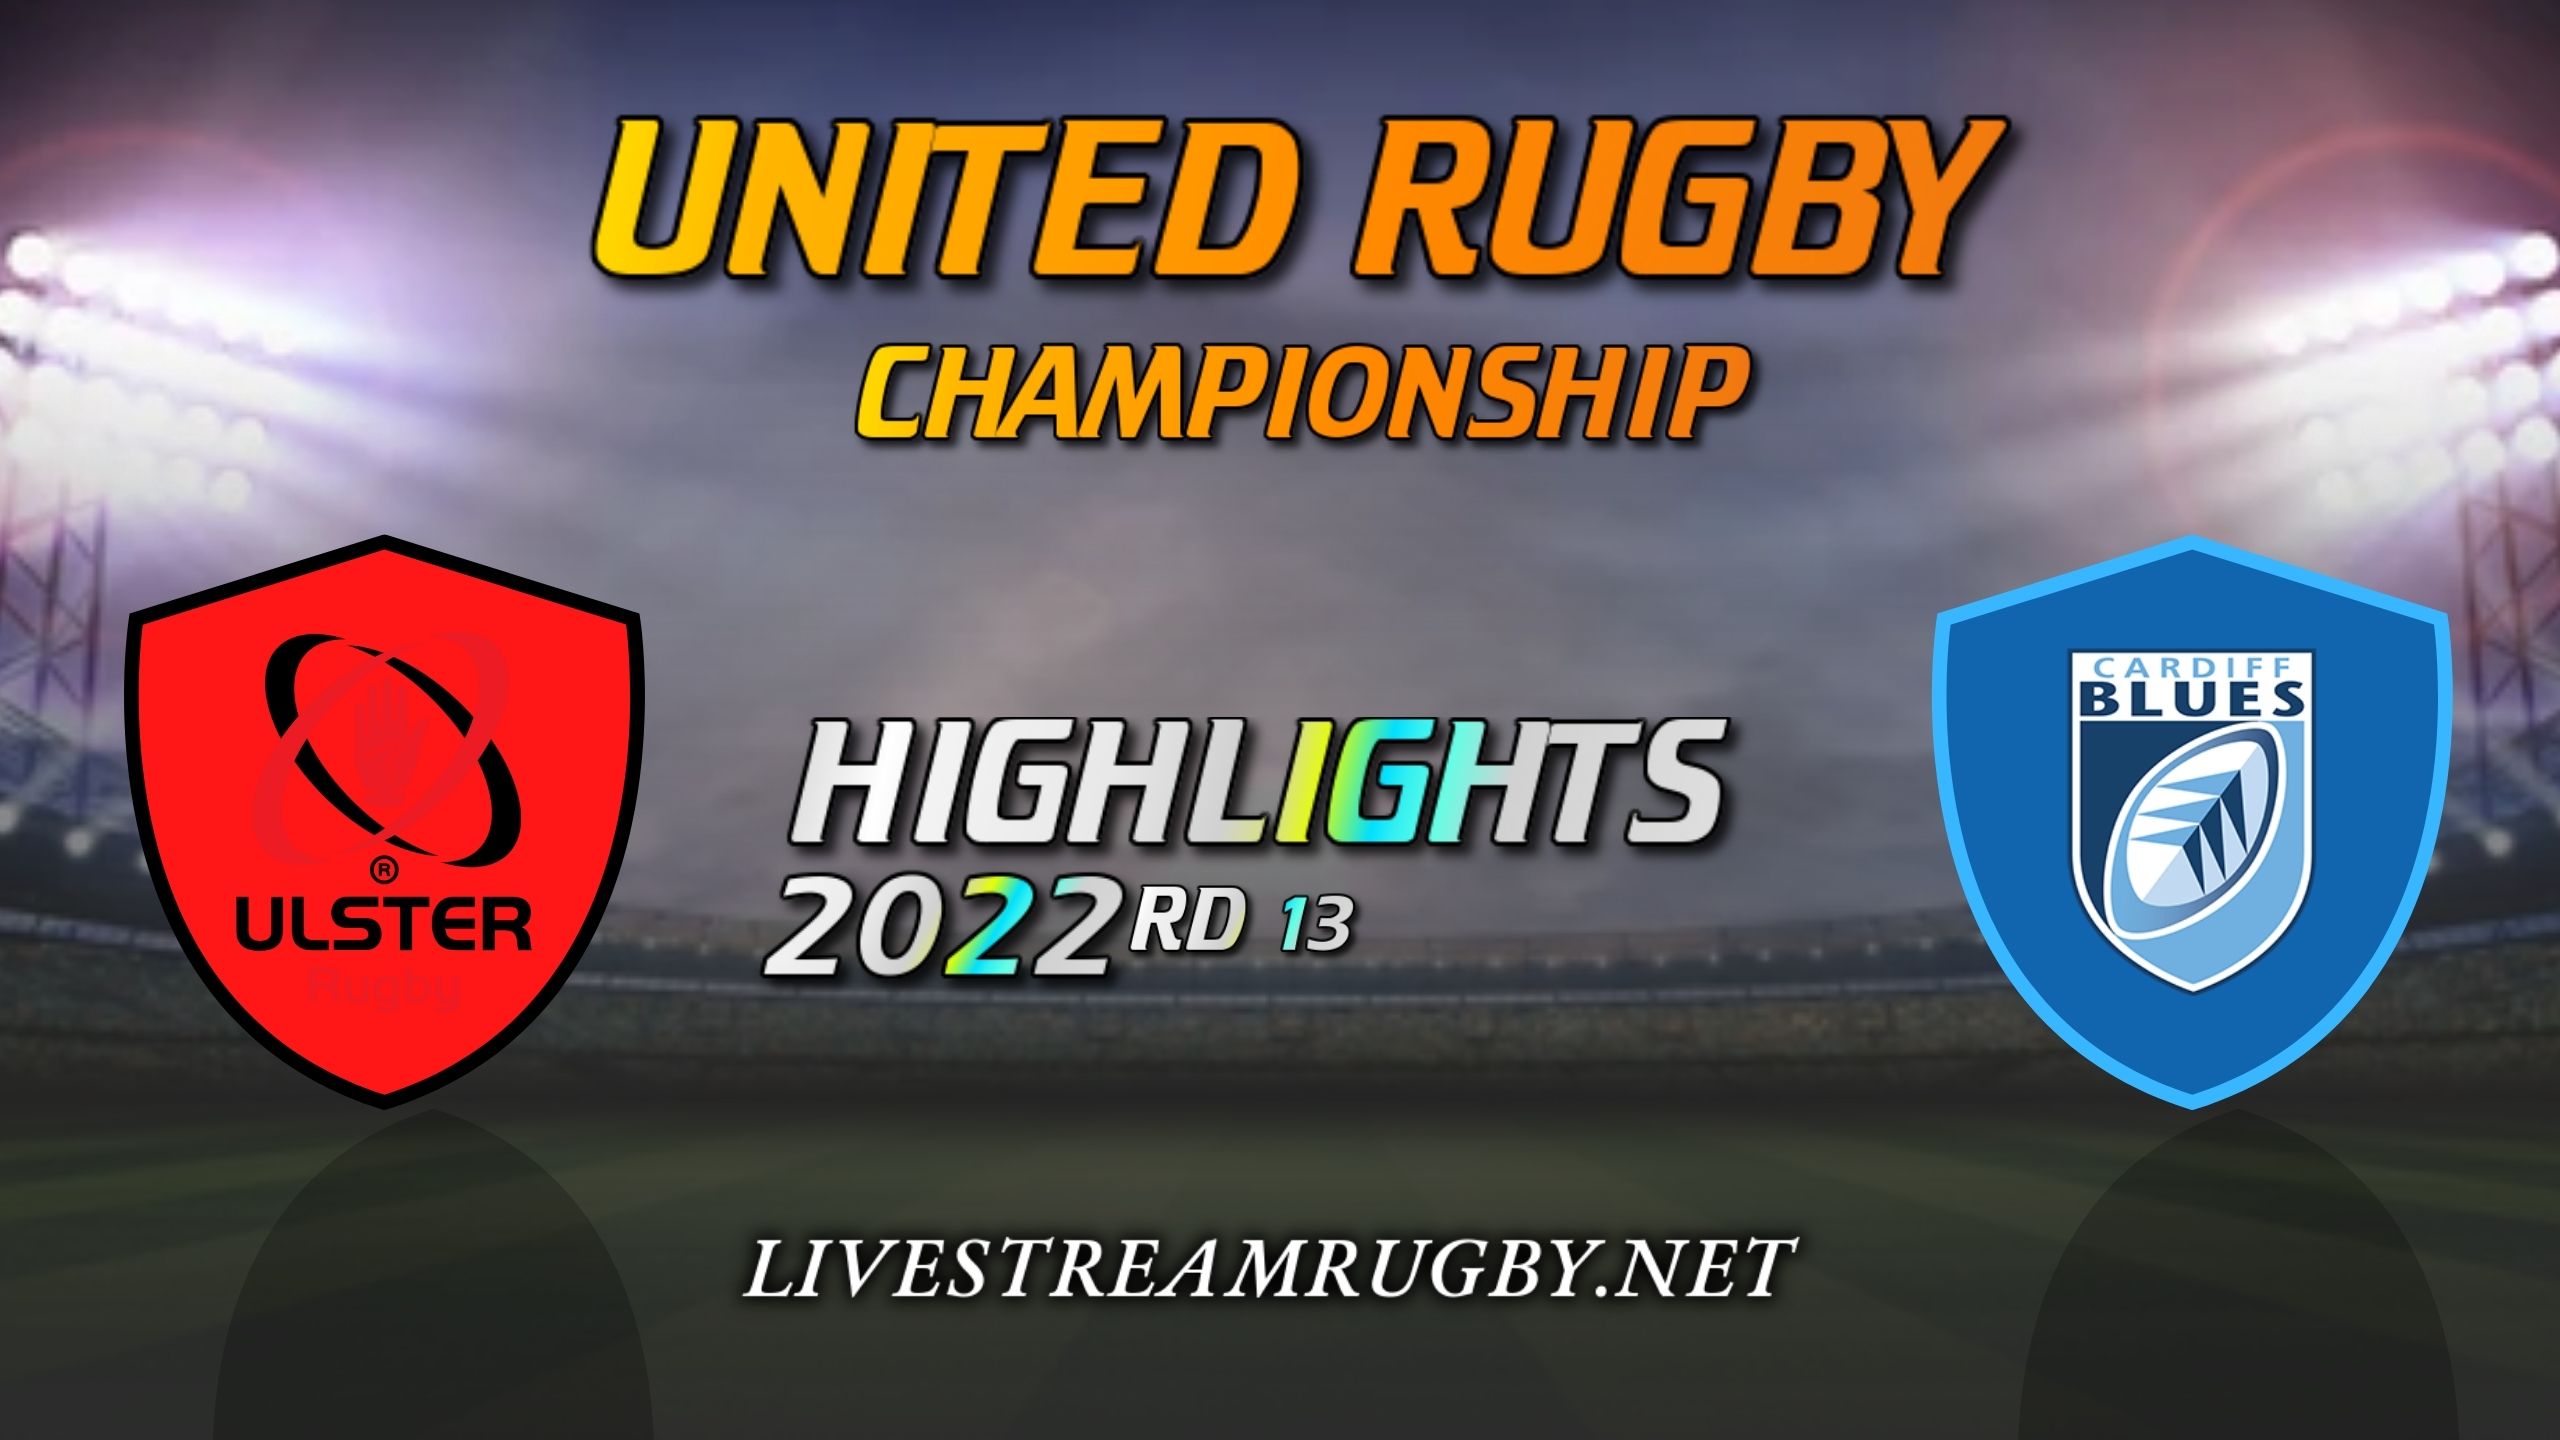 Ulster Vs Cardiff Rugby Highlights 2022 Rd 13 United Rugby